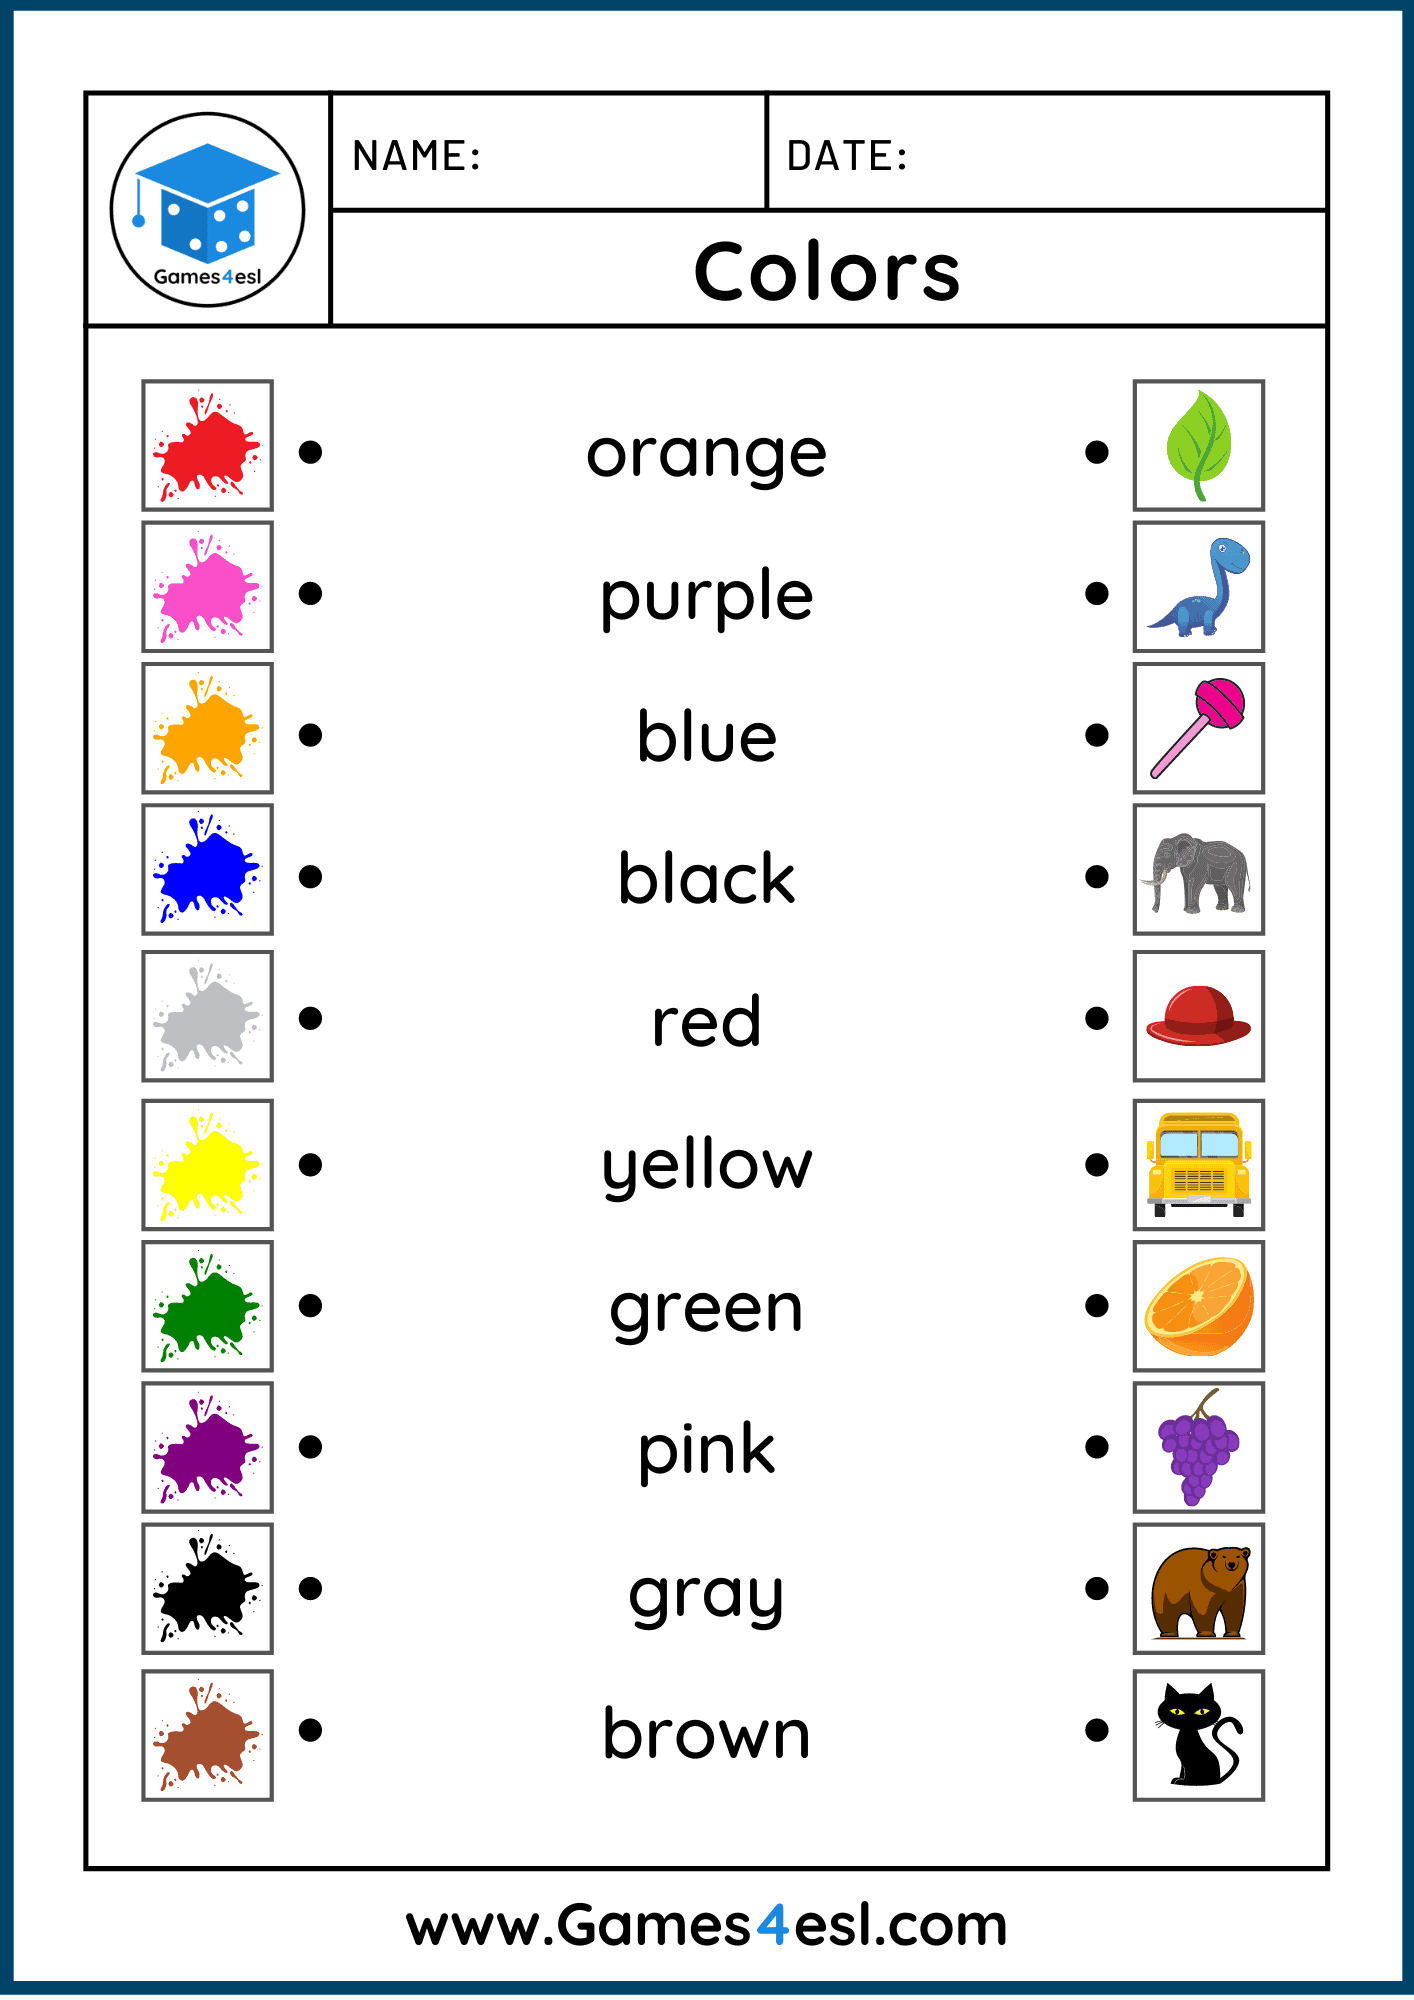 homework about colors